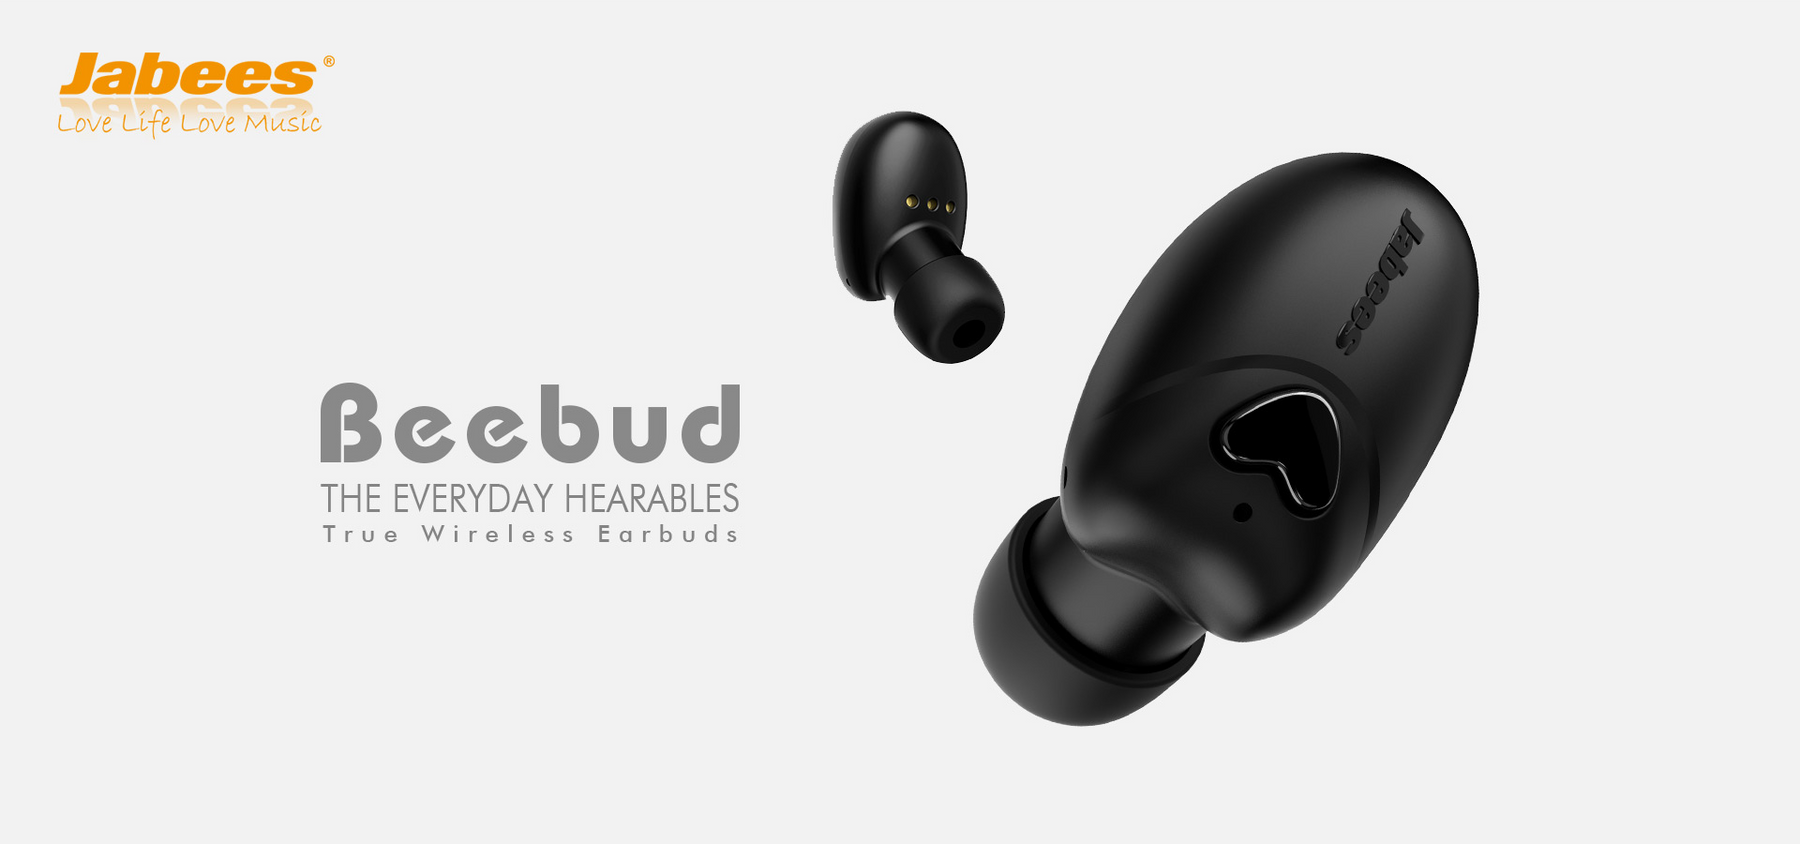 Jabees Beebud - The Unparalleled Wireless Earbuds and Unique Corporate Gift